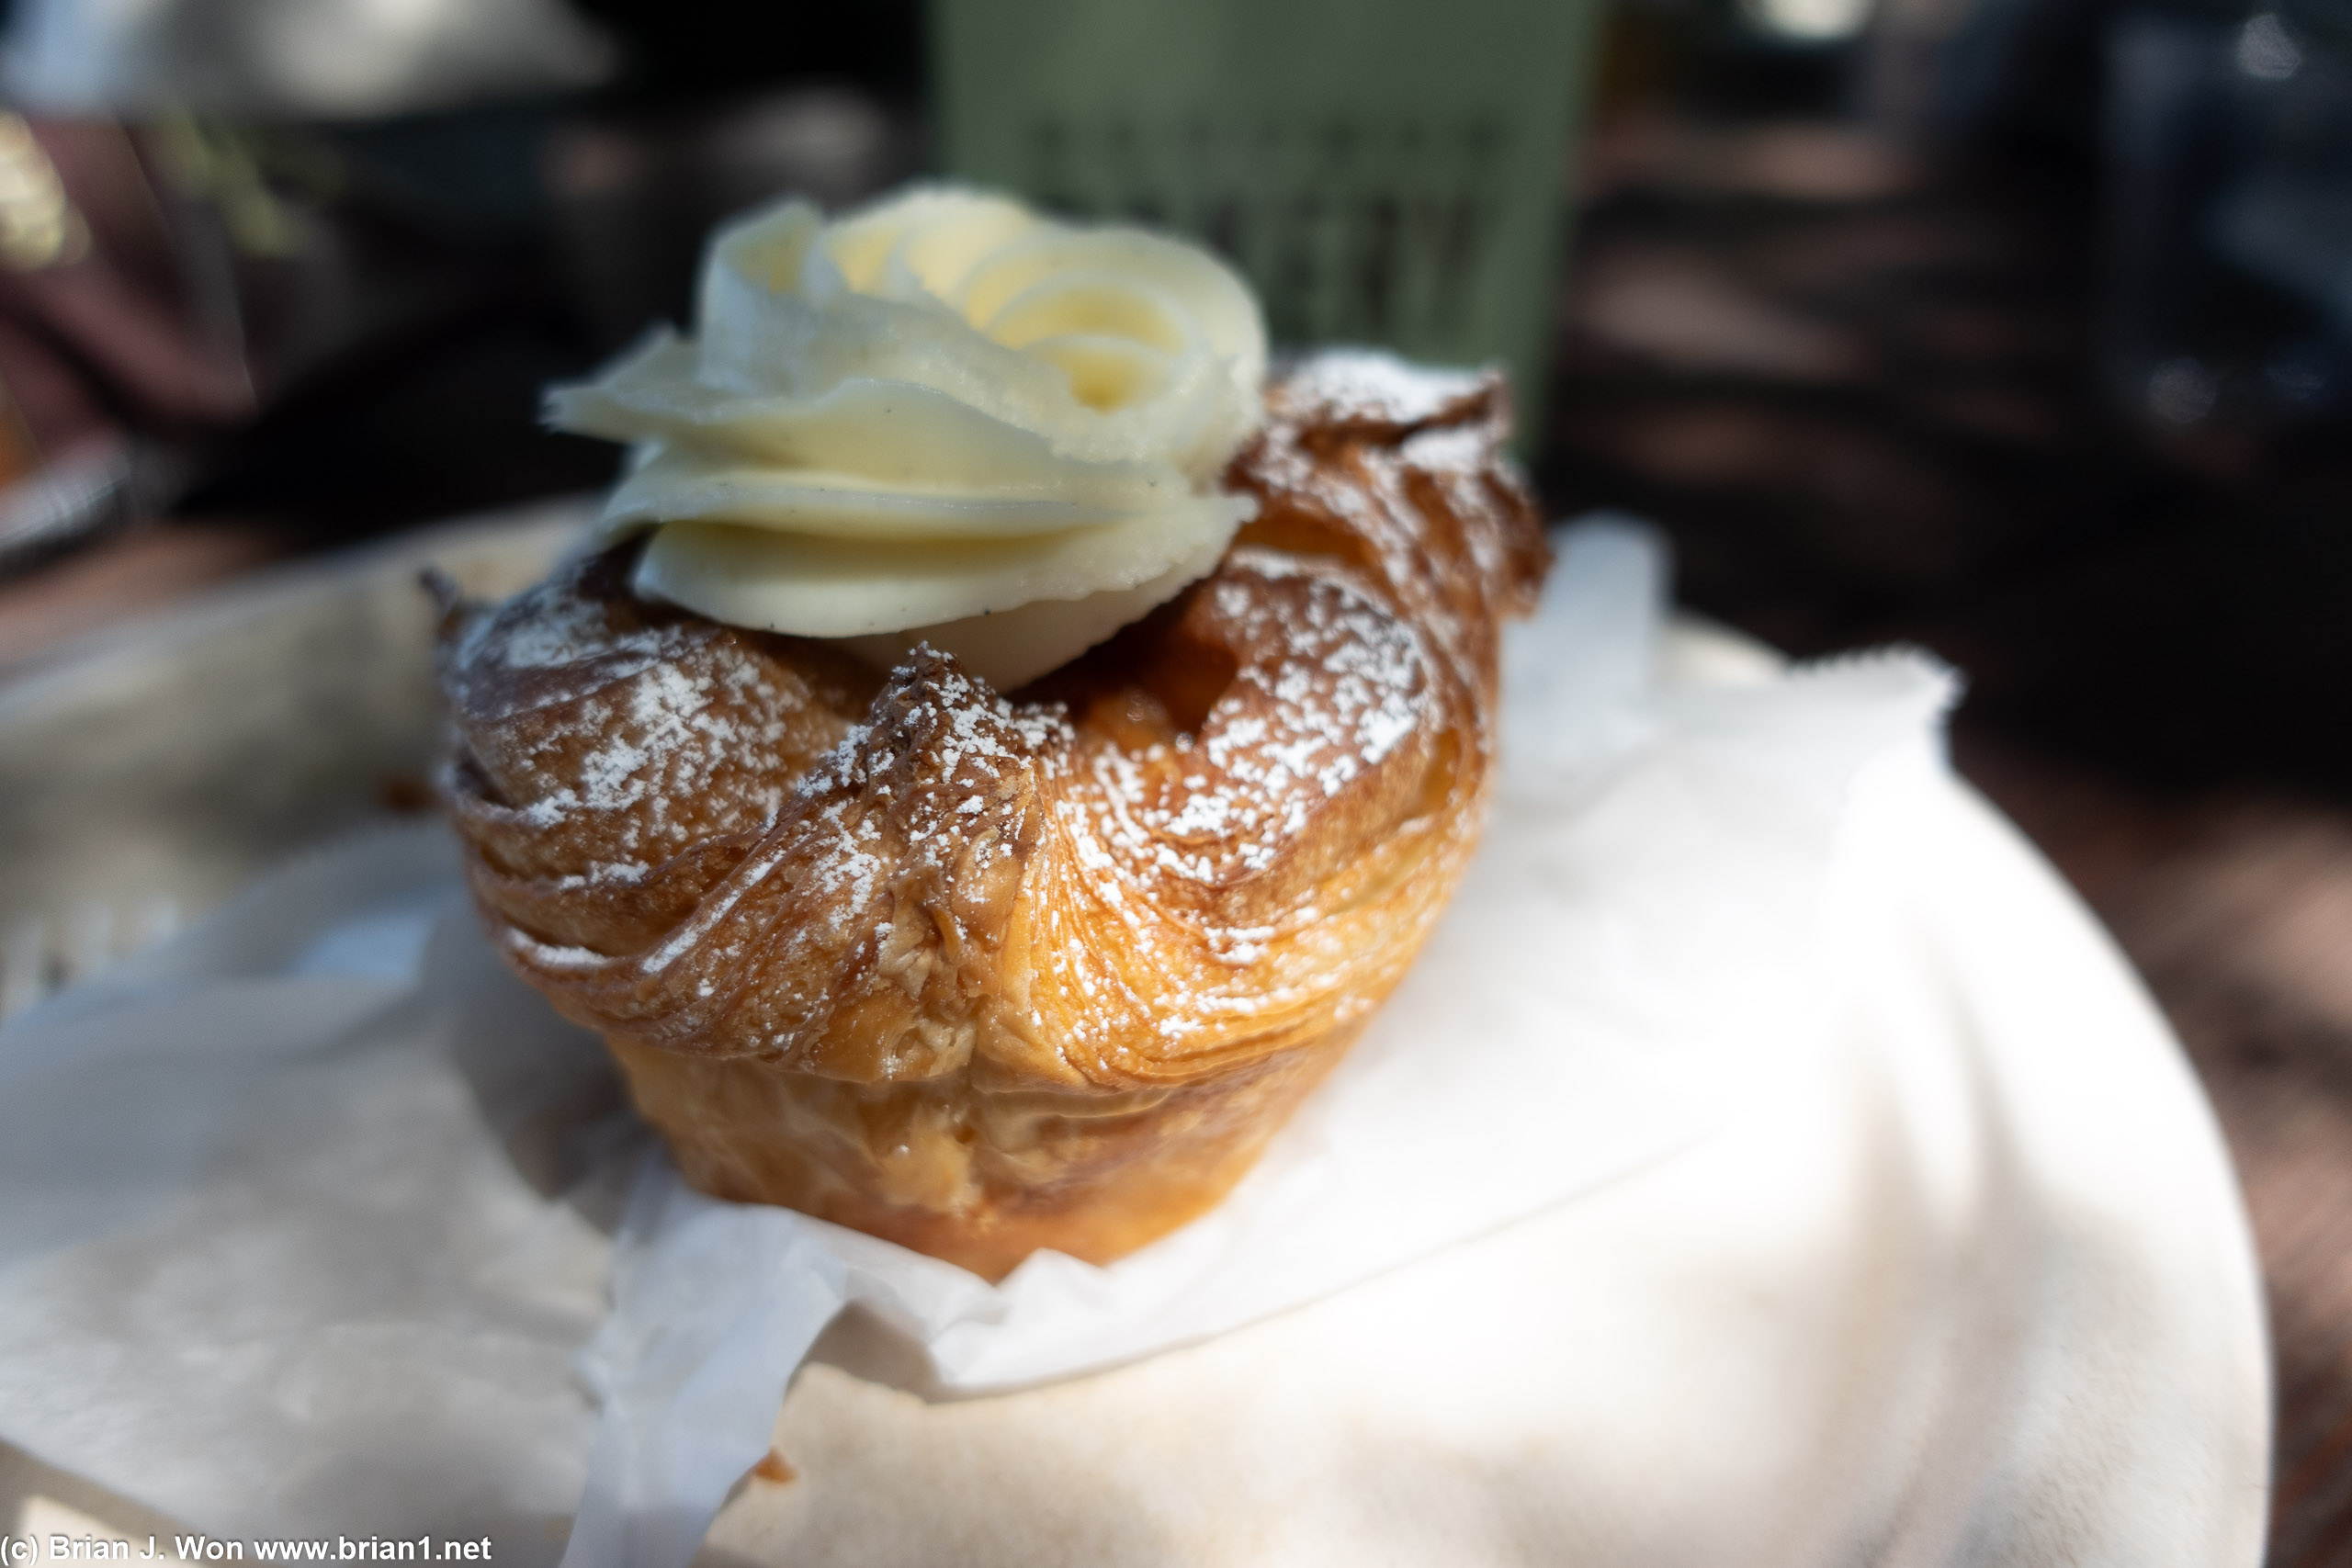 Cream cheese pastry from Bouchon was forgettable.